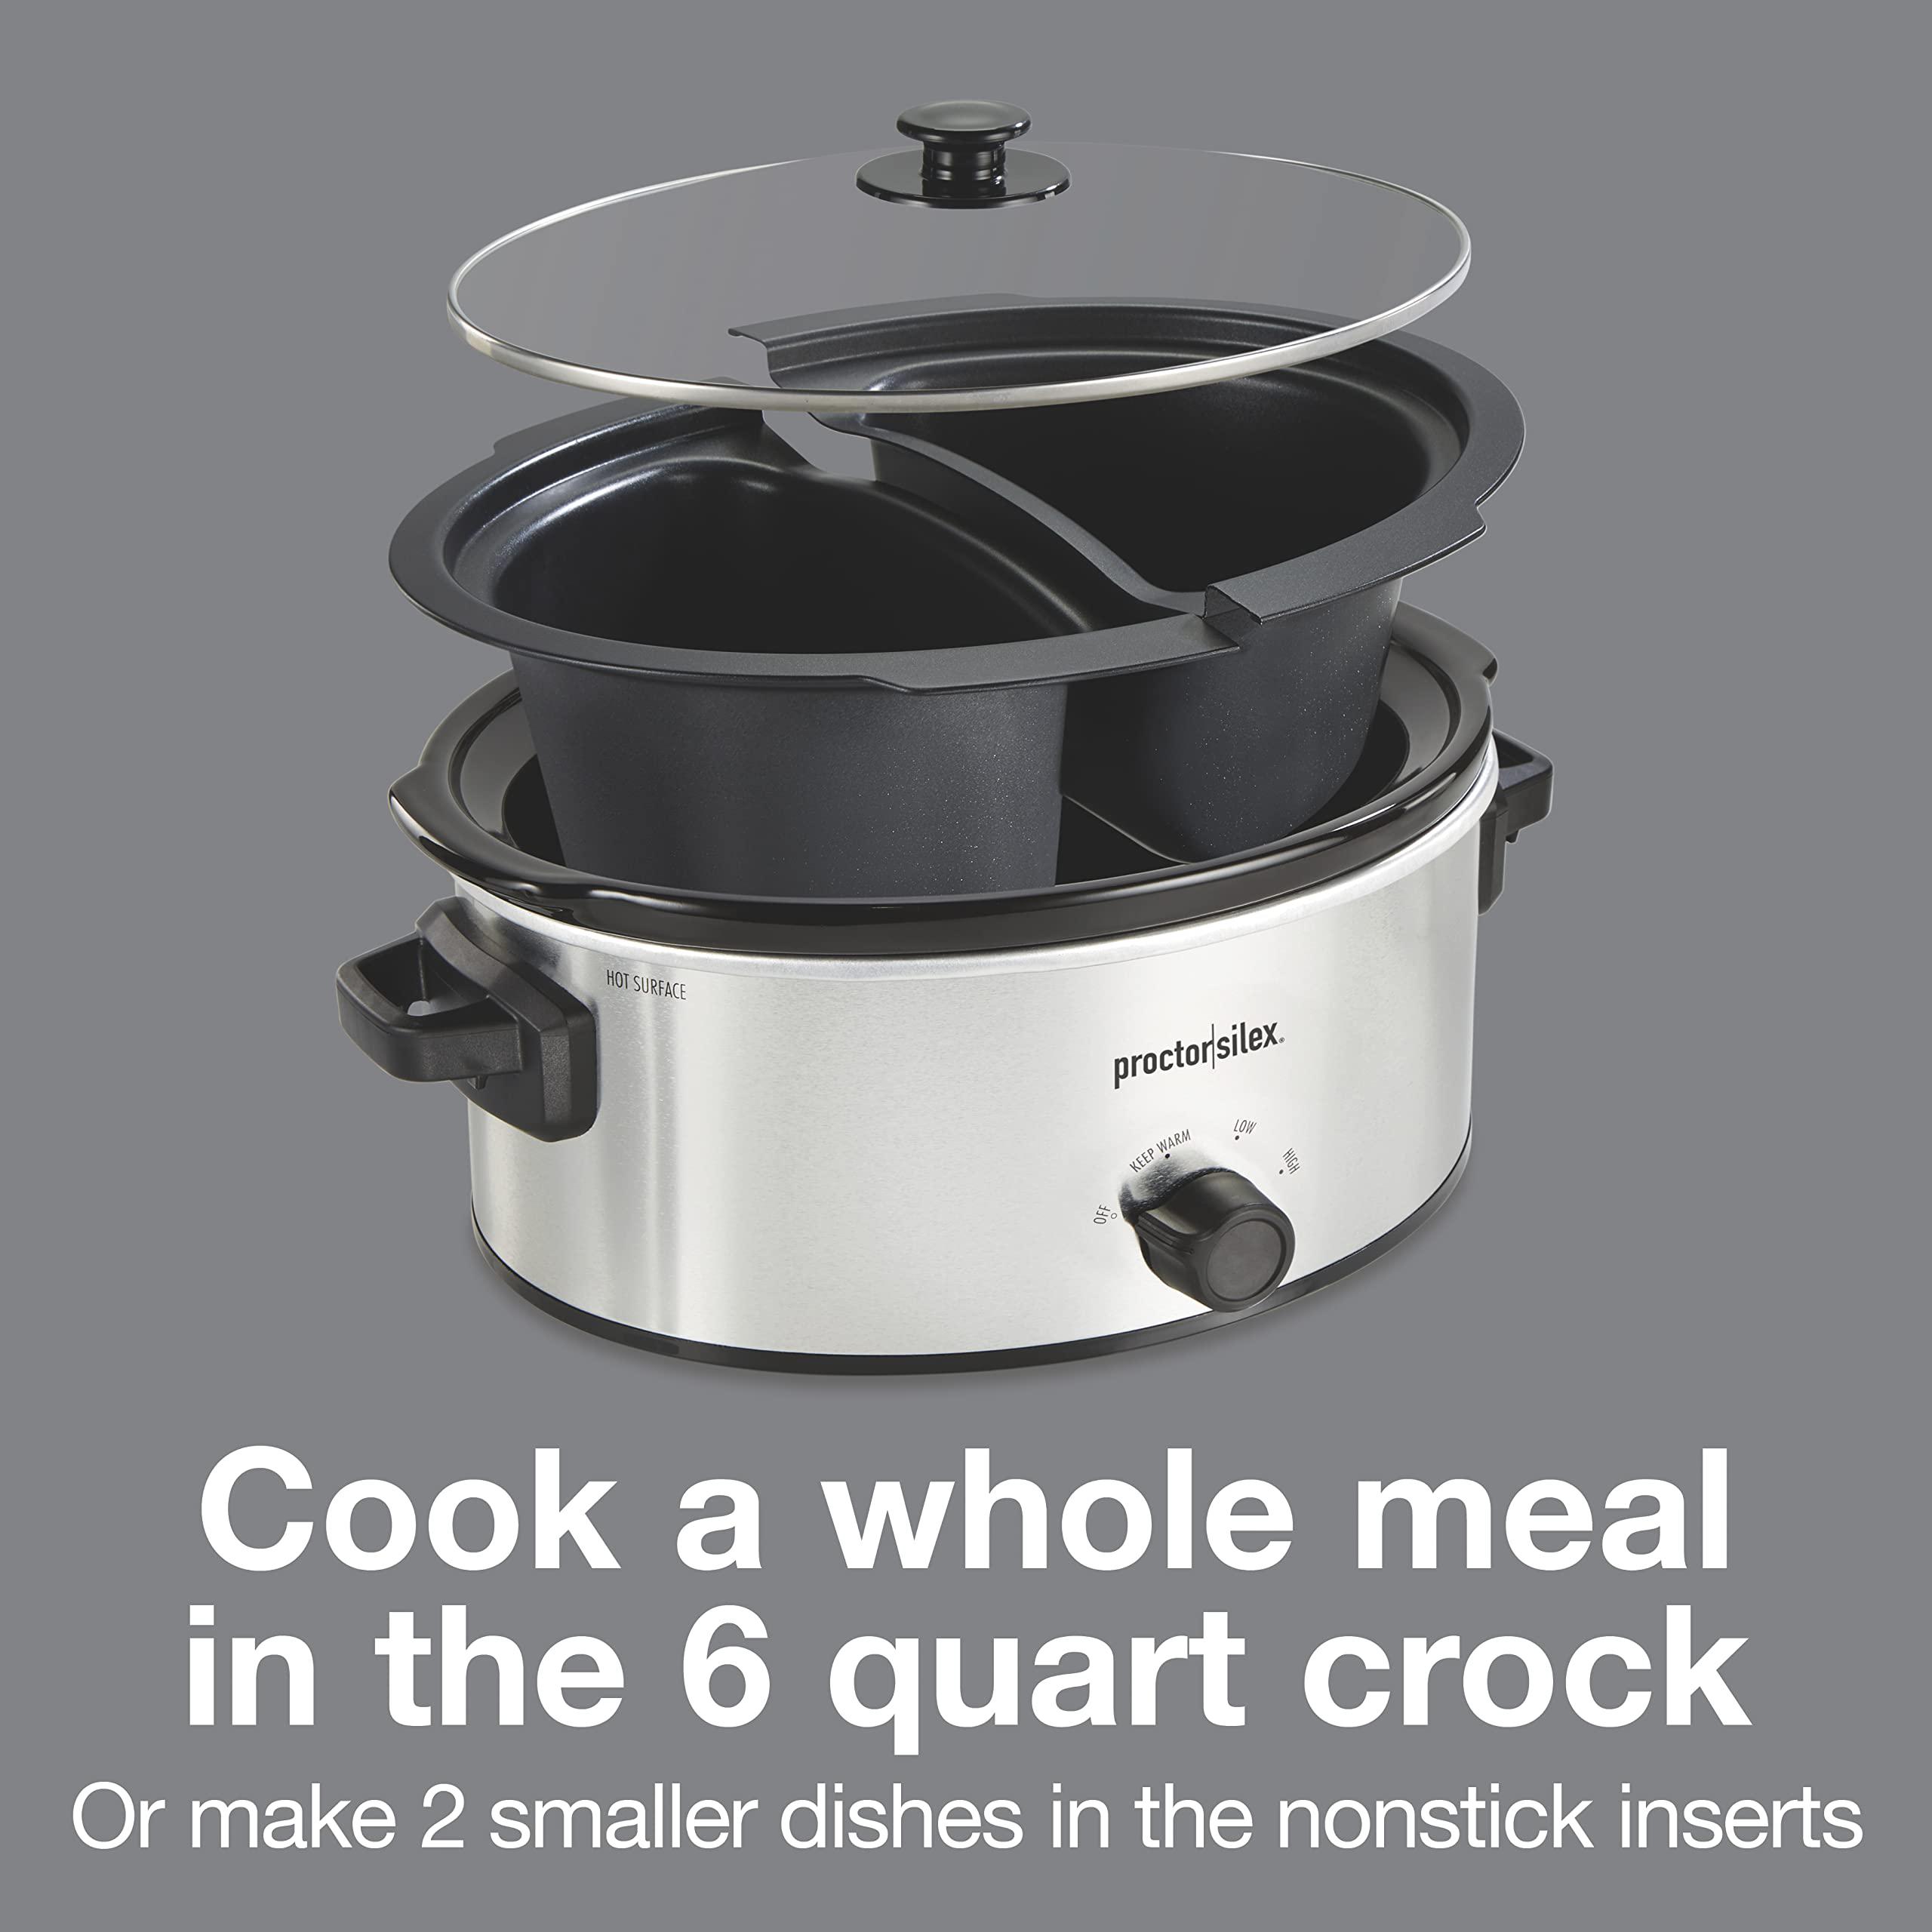 proctor silex double dish slow cooker with 6qt crock and dual 2.5qt nonstick insert to cook two meals at once, dishwasher saf